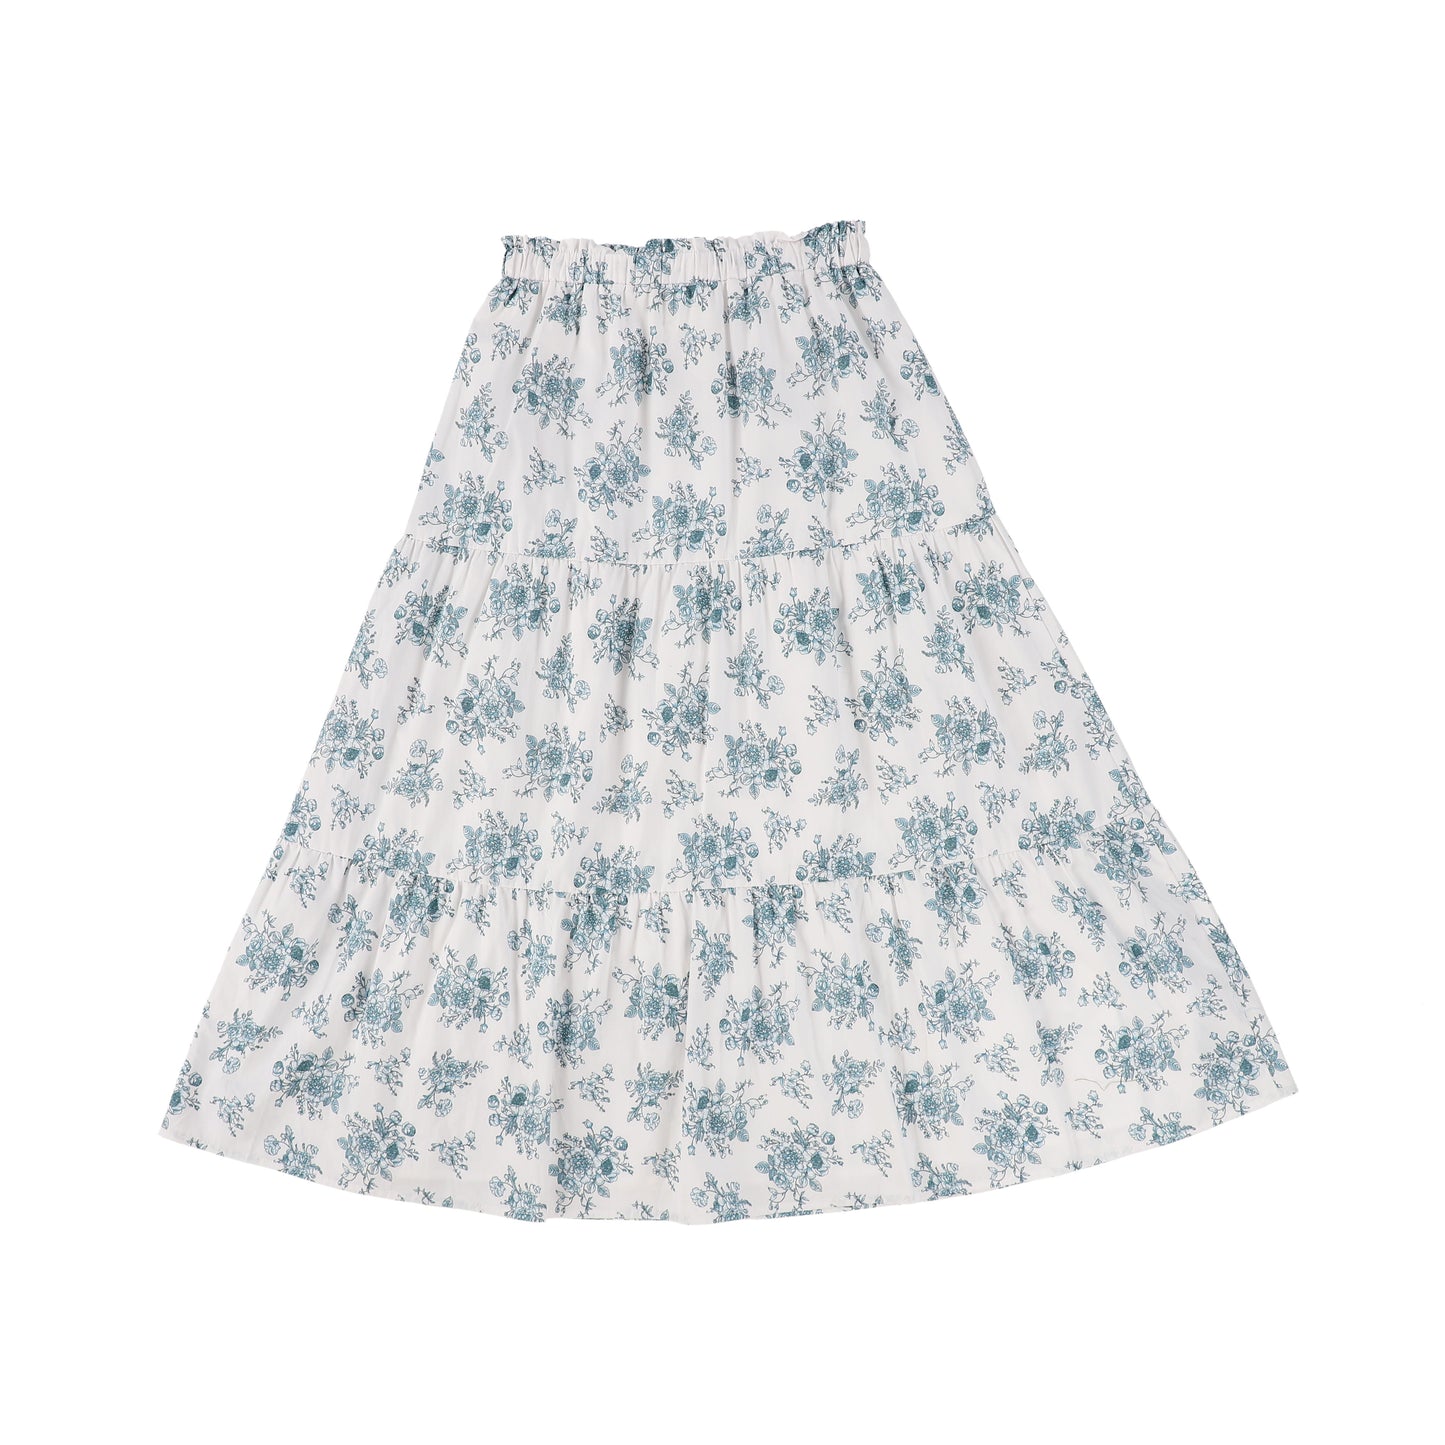 BAMBOO BLUE FLORAL BUNCHES TIERED SKIRT